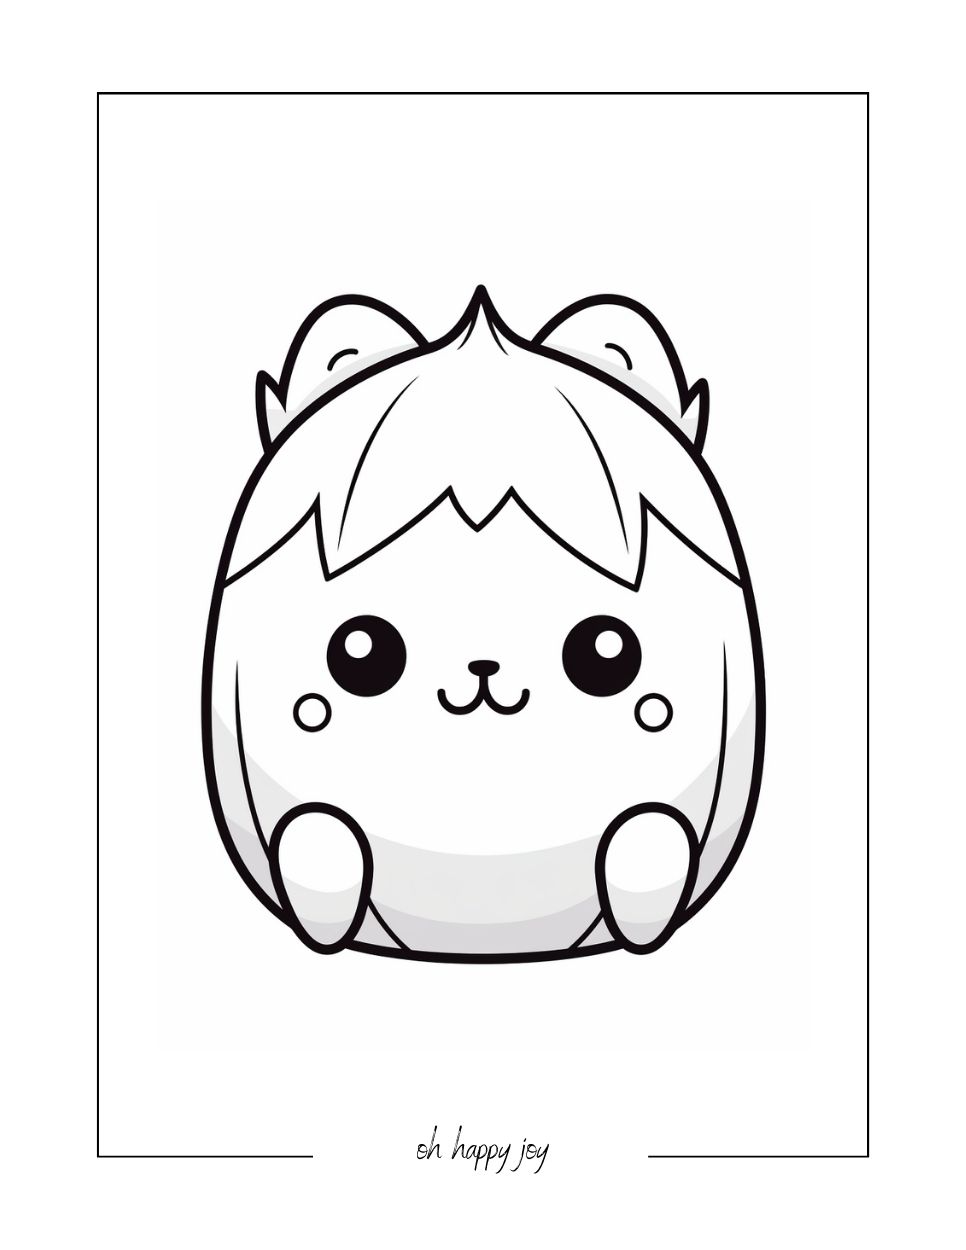 Leaf squishmallow coloring page